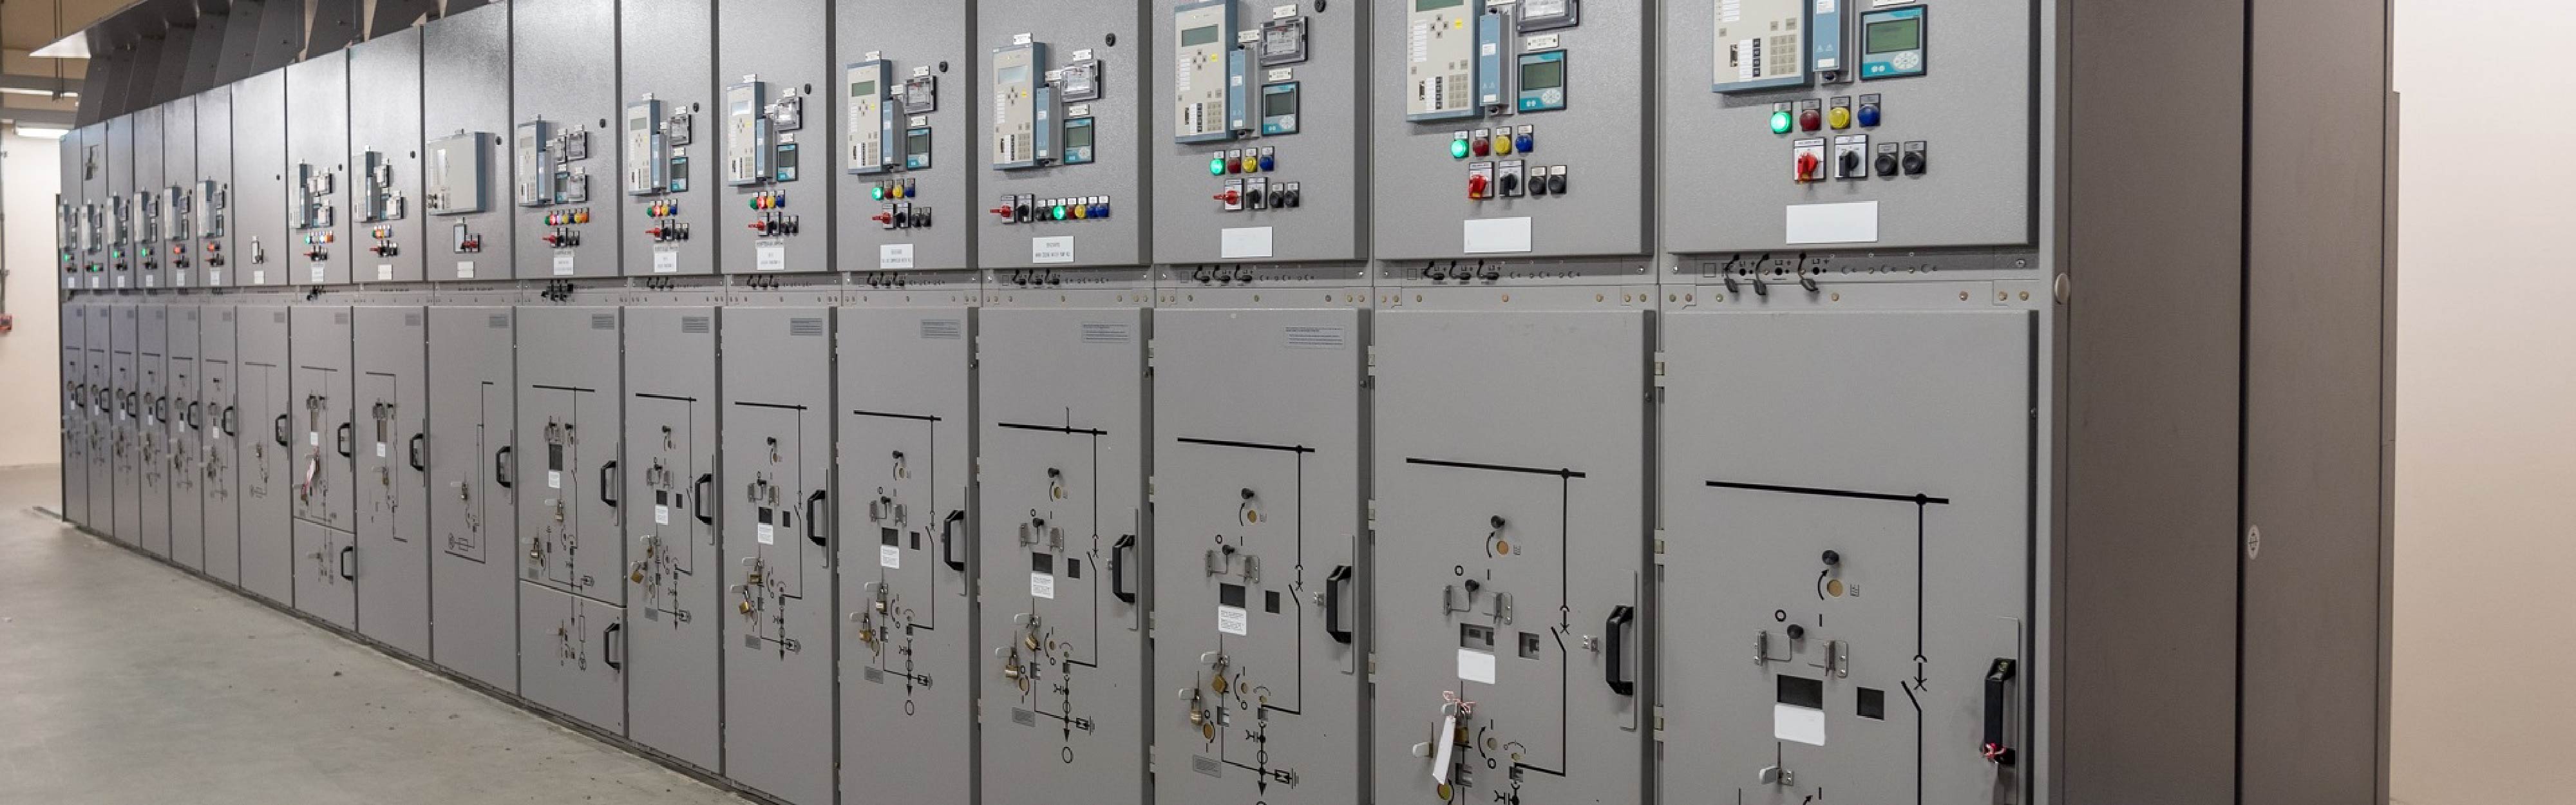 ESEC completed “Supplying control power and SCADA systems” project for Sika Nhon Trach Factory